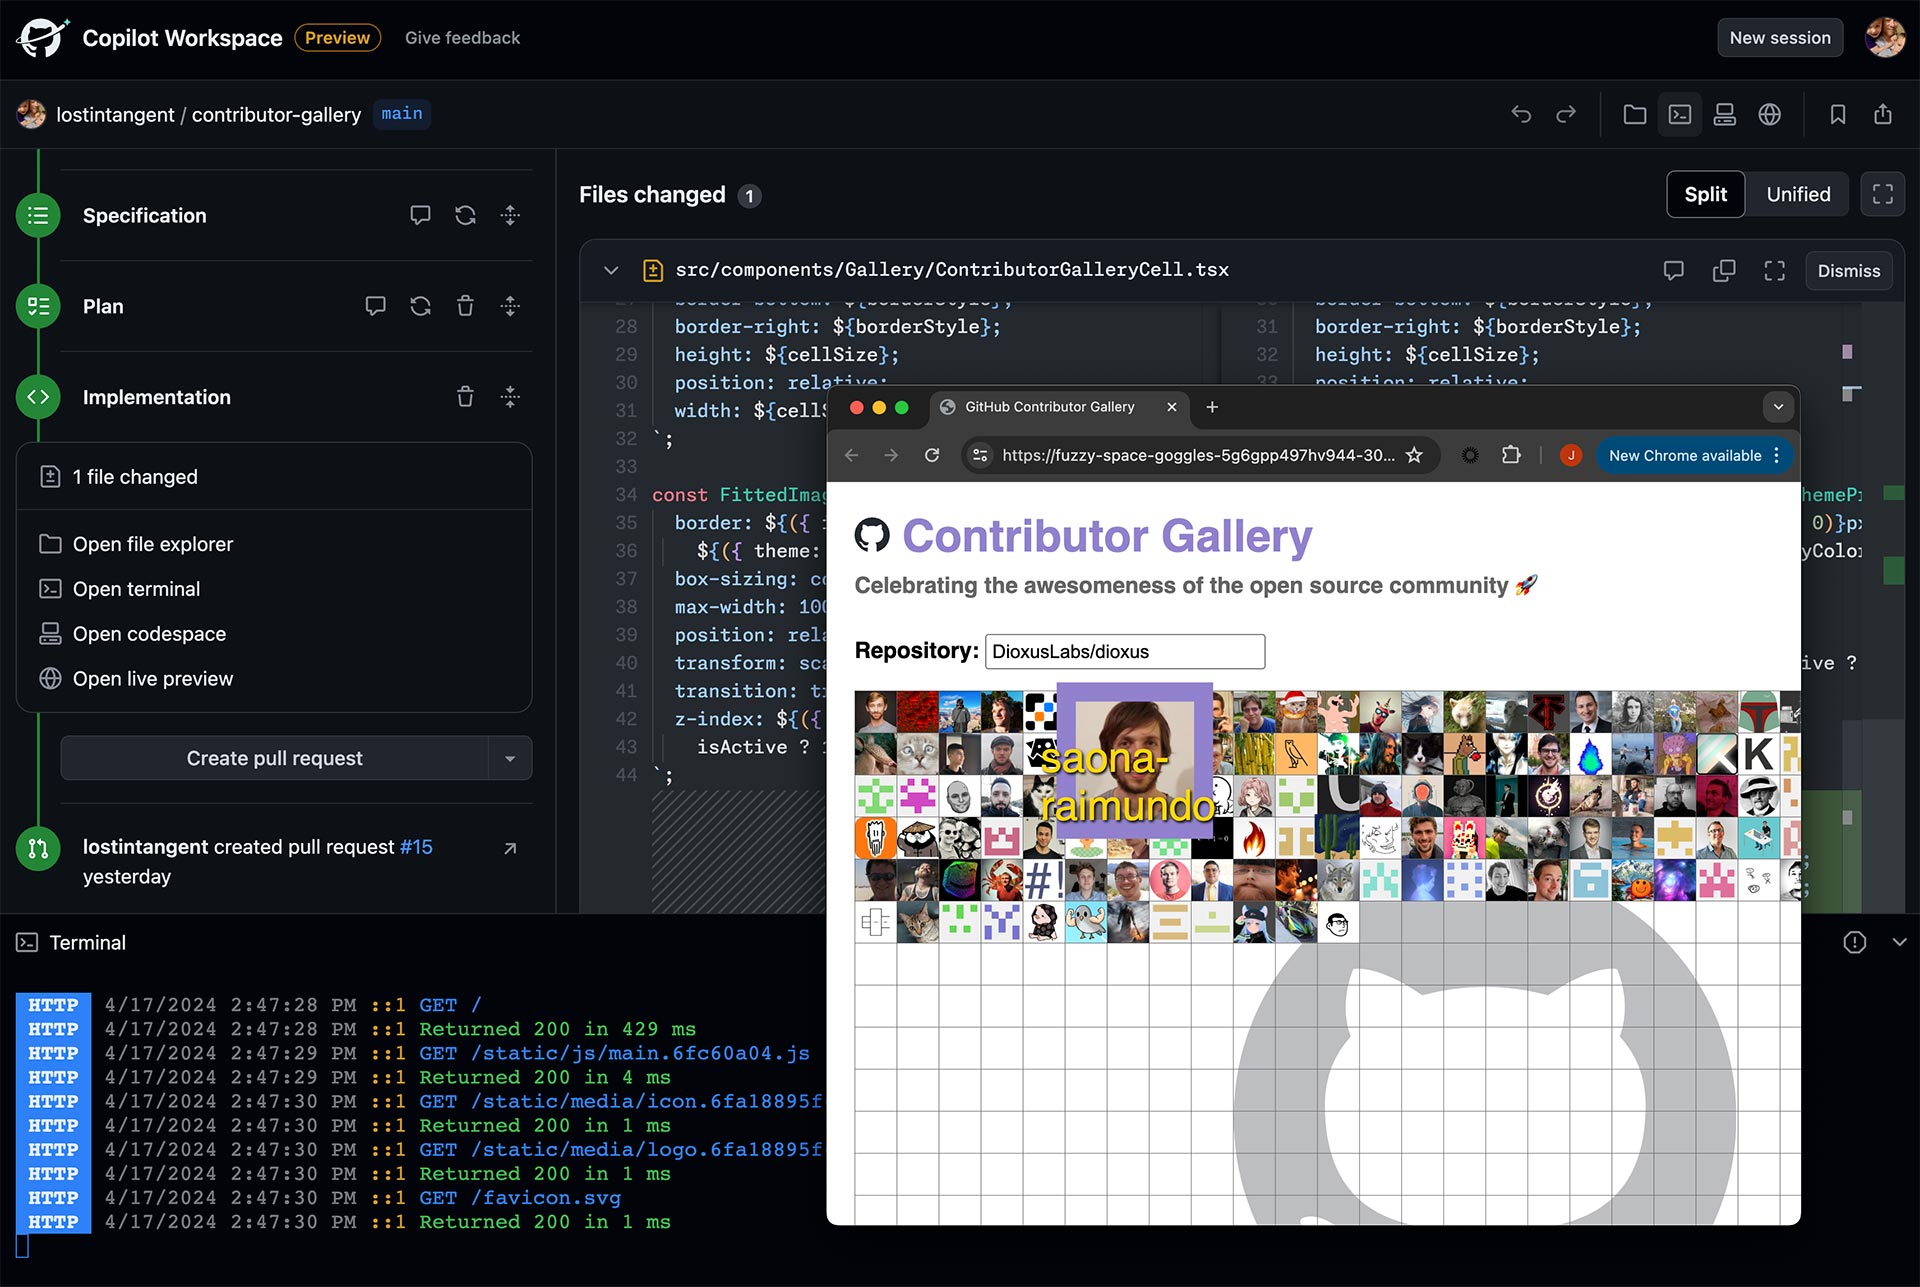 GitHub previews Copilot Workspace, an AI developer environment to turn ideas into software